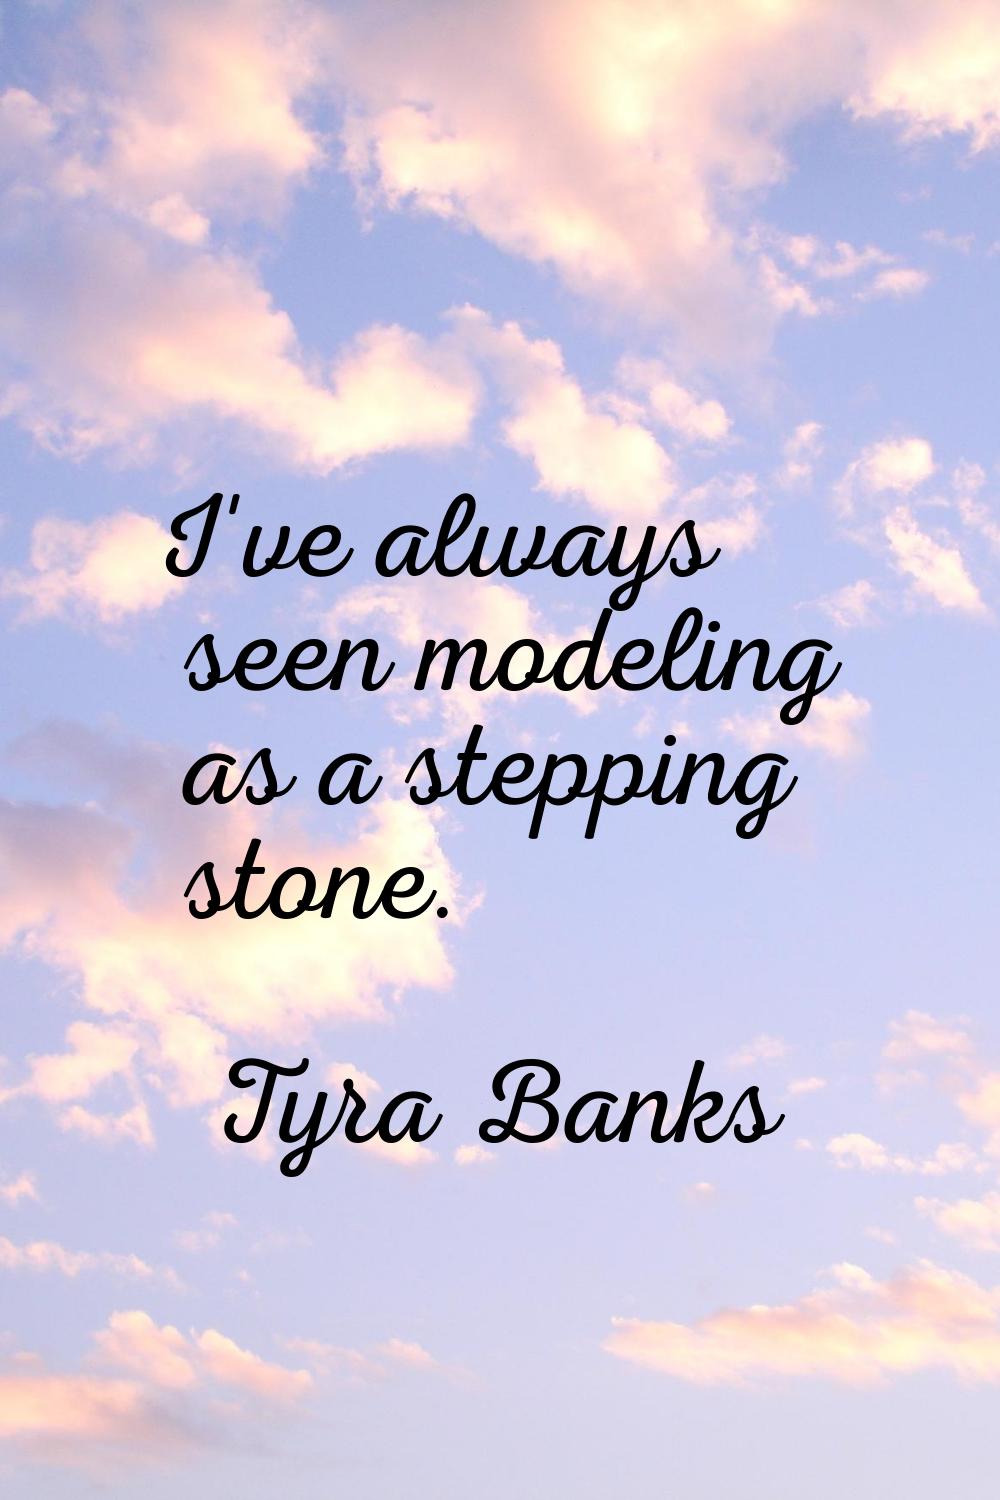 I've always seen modeling as a stepping stone.